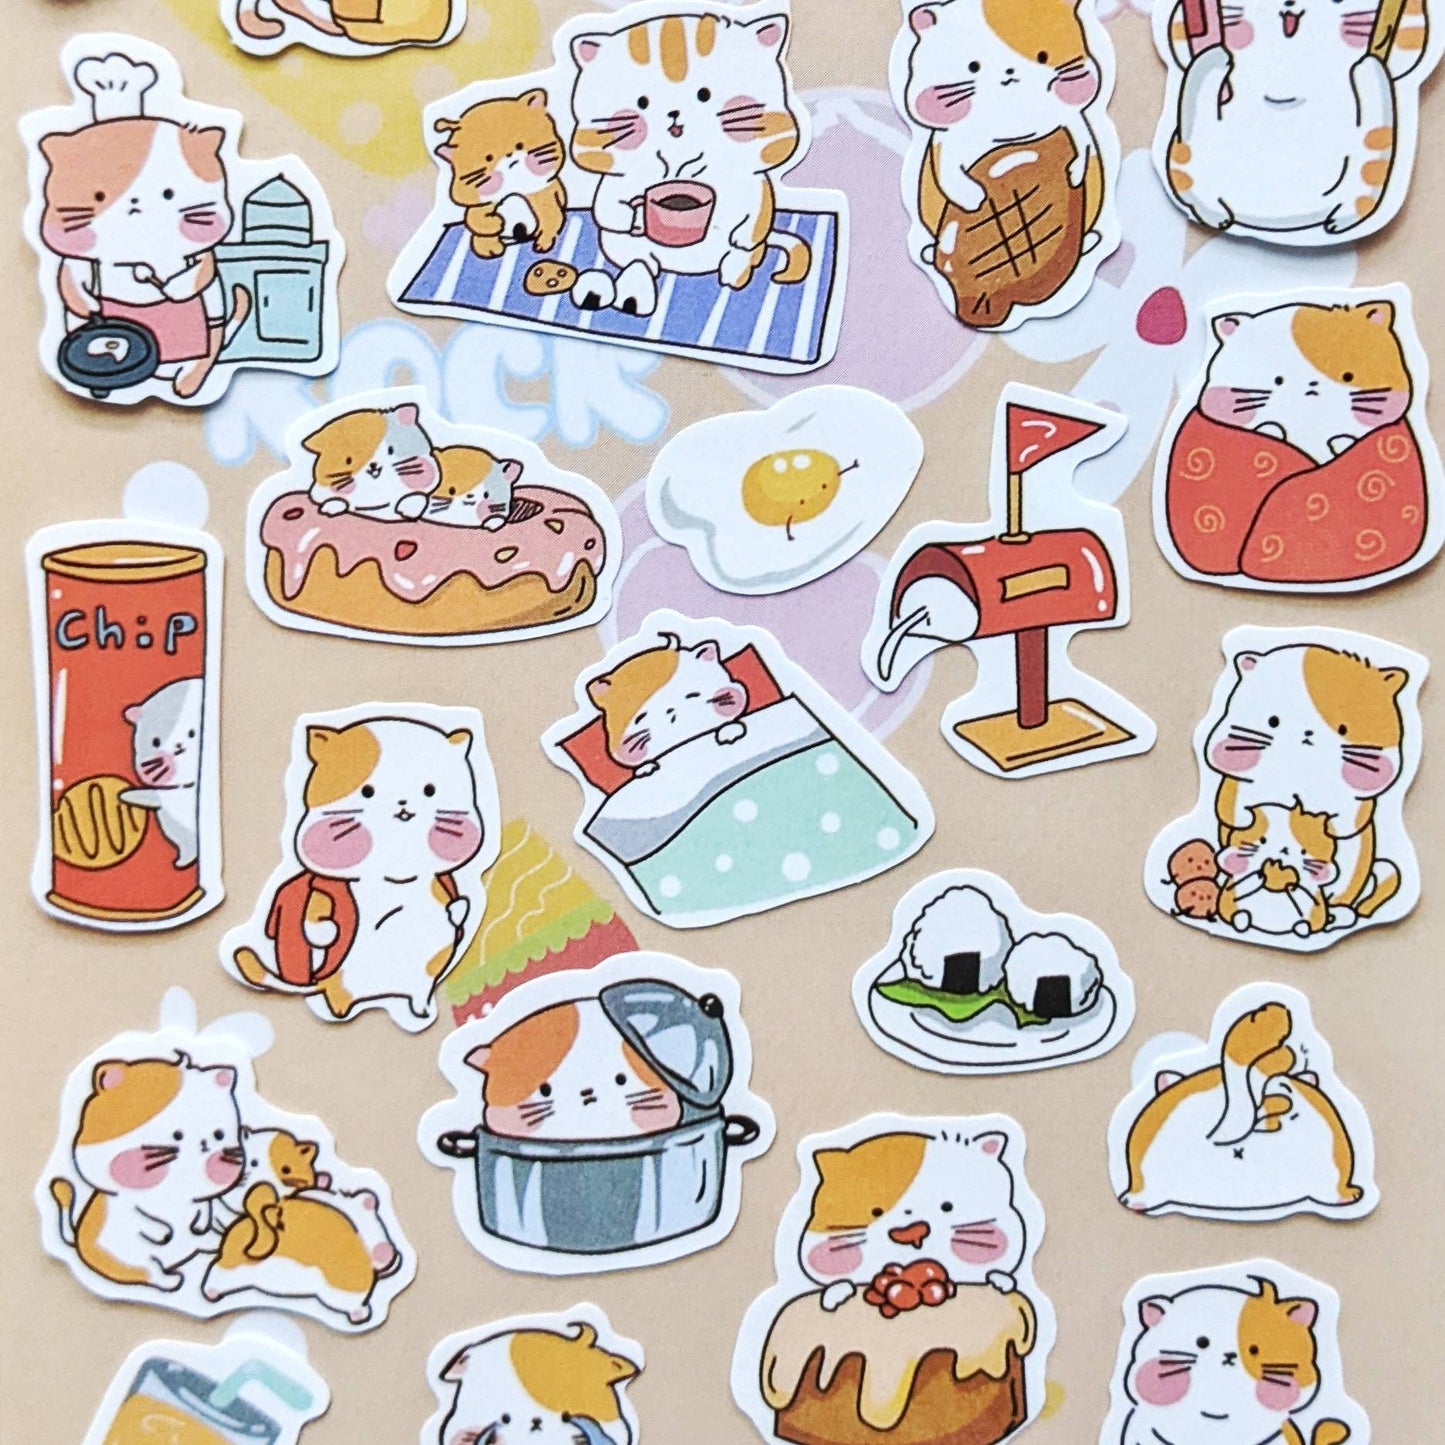 Adorable Cat With Foods Stickers | Cute animal Stickers | Cute Stickers